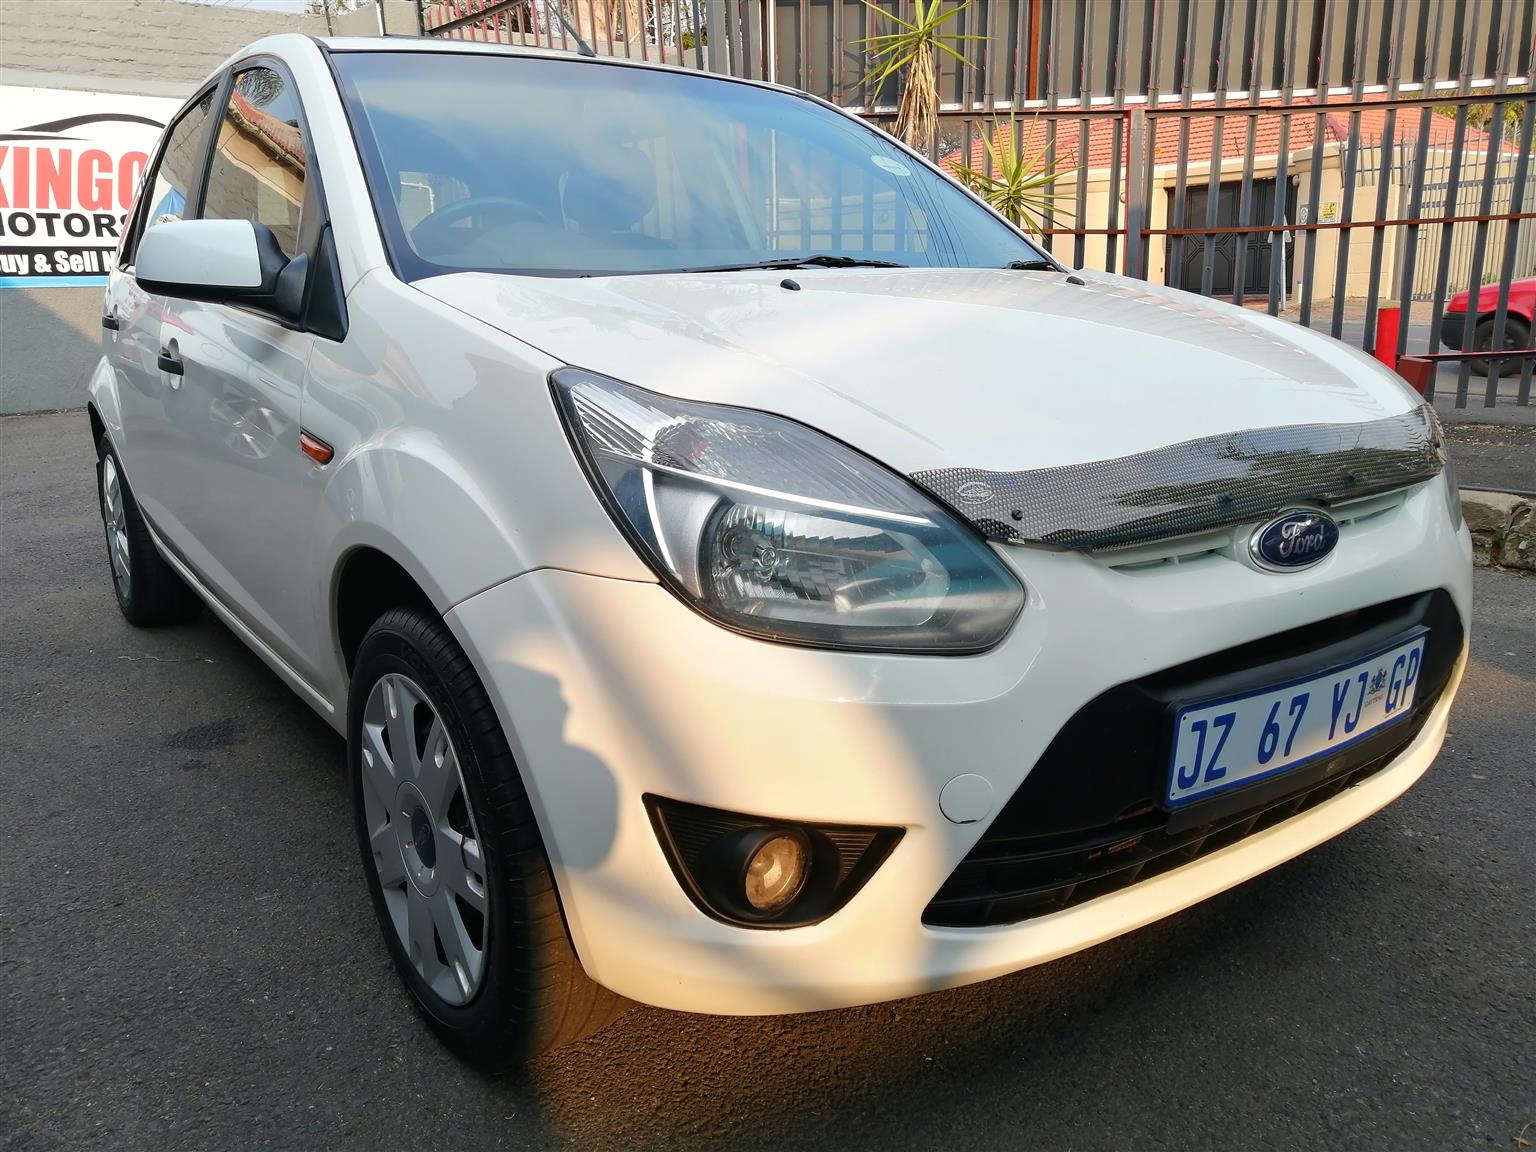 Ford Figo 1.4i Ambiente 5-Door Hatch Back for sale - R 64 900 |  Carfind.co.za